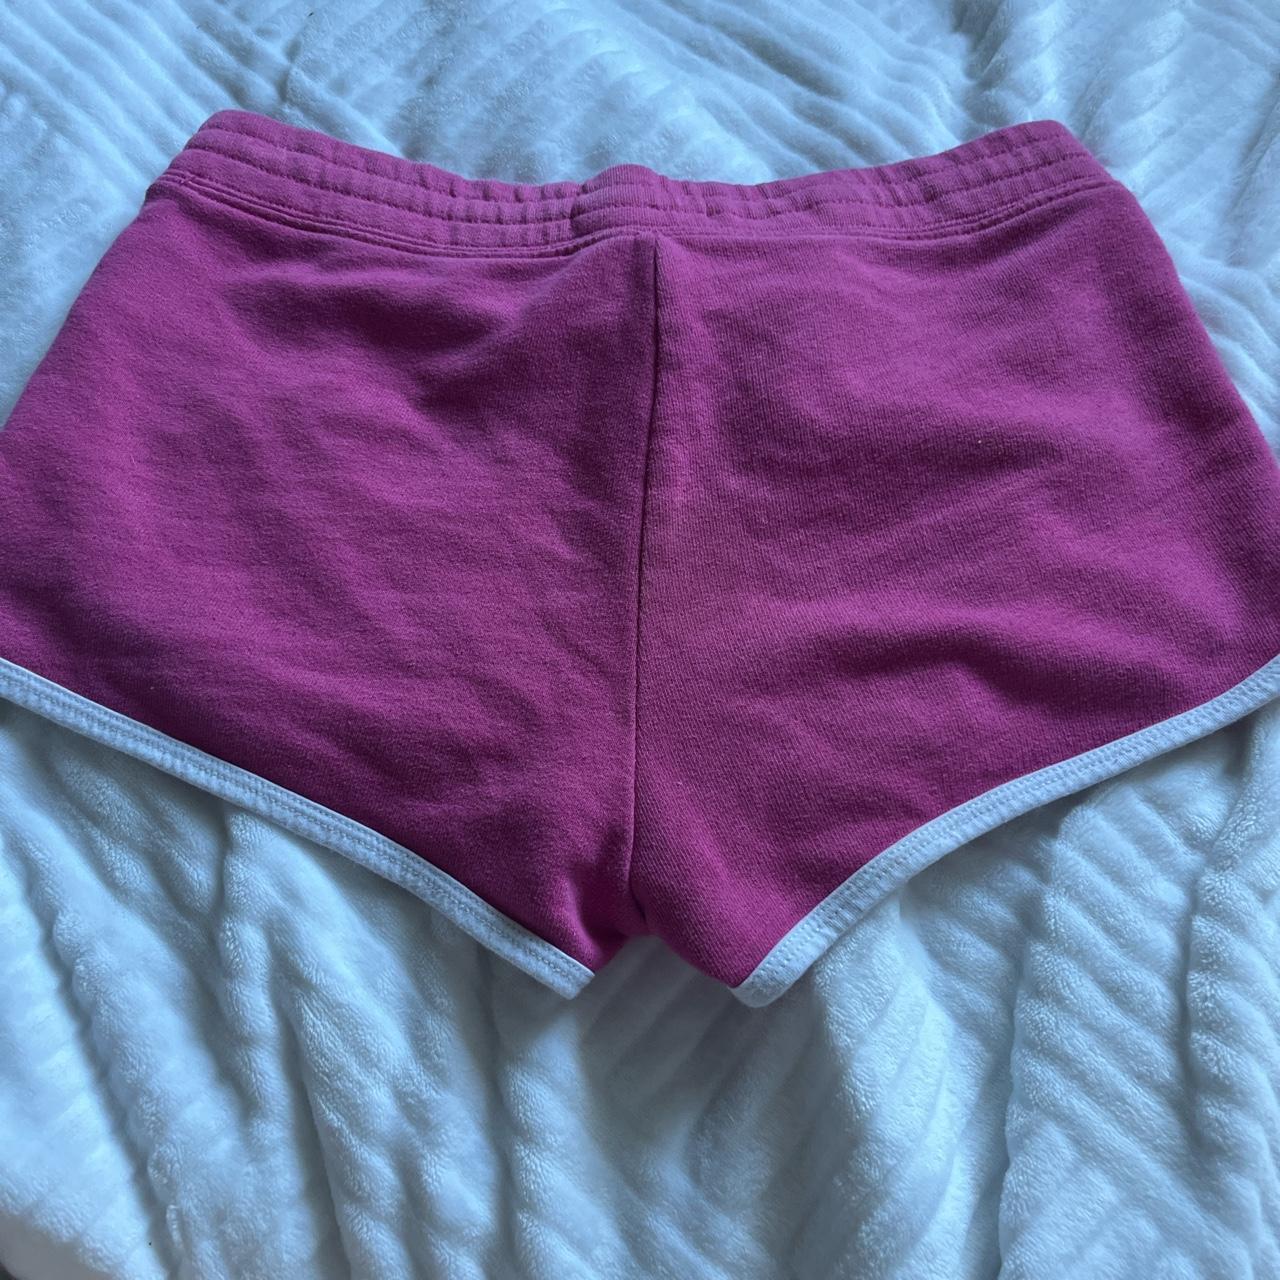 Xs iconic old holster booty shorts - Depop